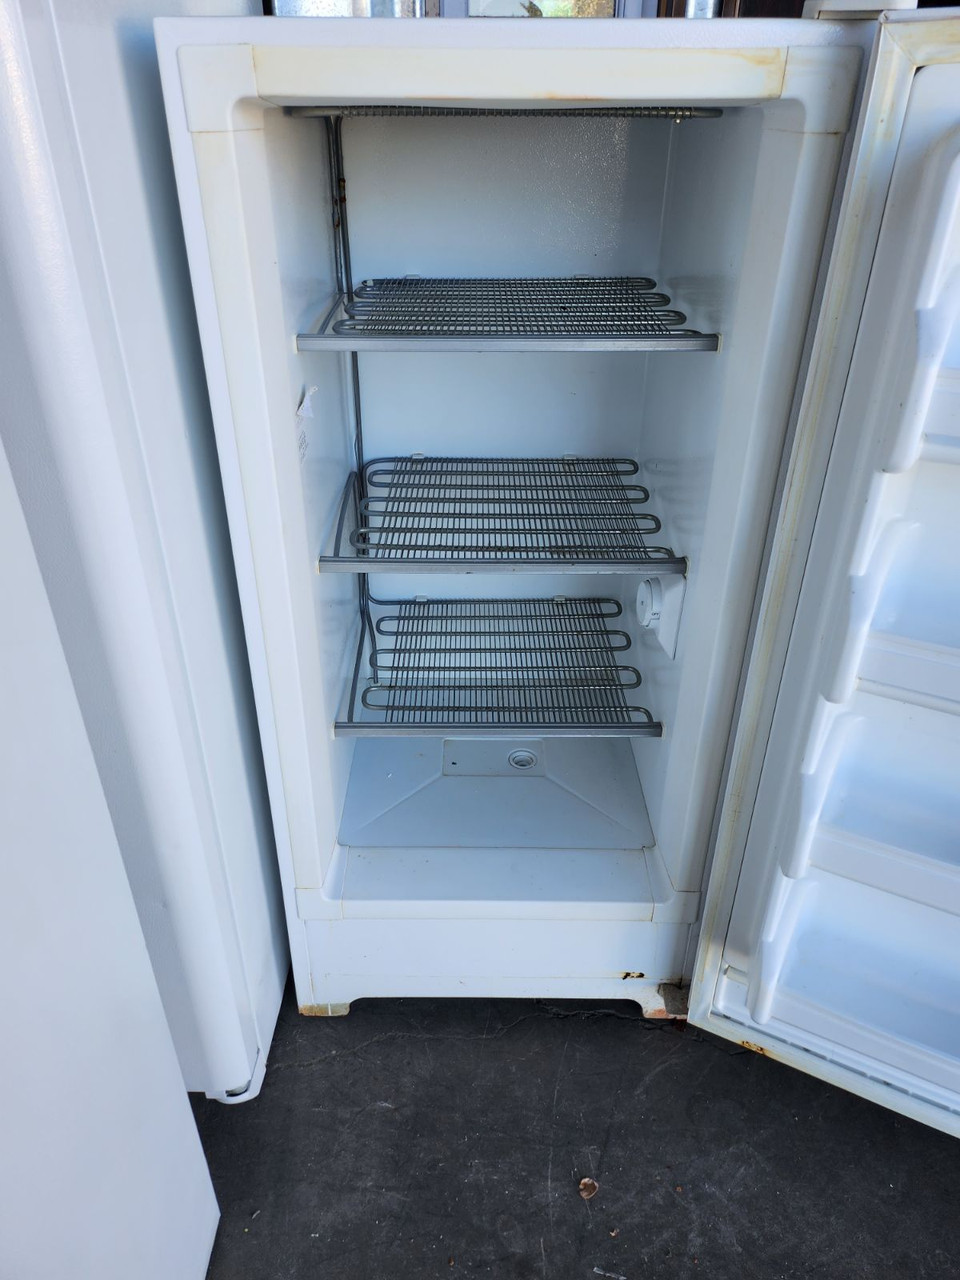 GIBSON 10 CUBIC FOOT UPRIGHT FREEZER MANUAL DEFROST 3 SHELVES 4 STORAGE  COMPARTMENTS IN THE DOOR FOR EXTRA STORAGE COSMETIC ISSUES PLEASE SEE PIC  WHITE LOCATED IN OUR PORTLAND OREGON APPLIANCE STORE SKU 16577